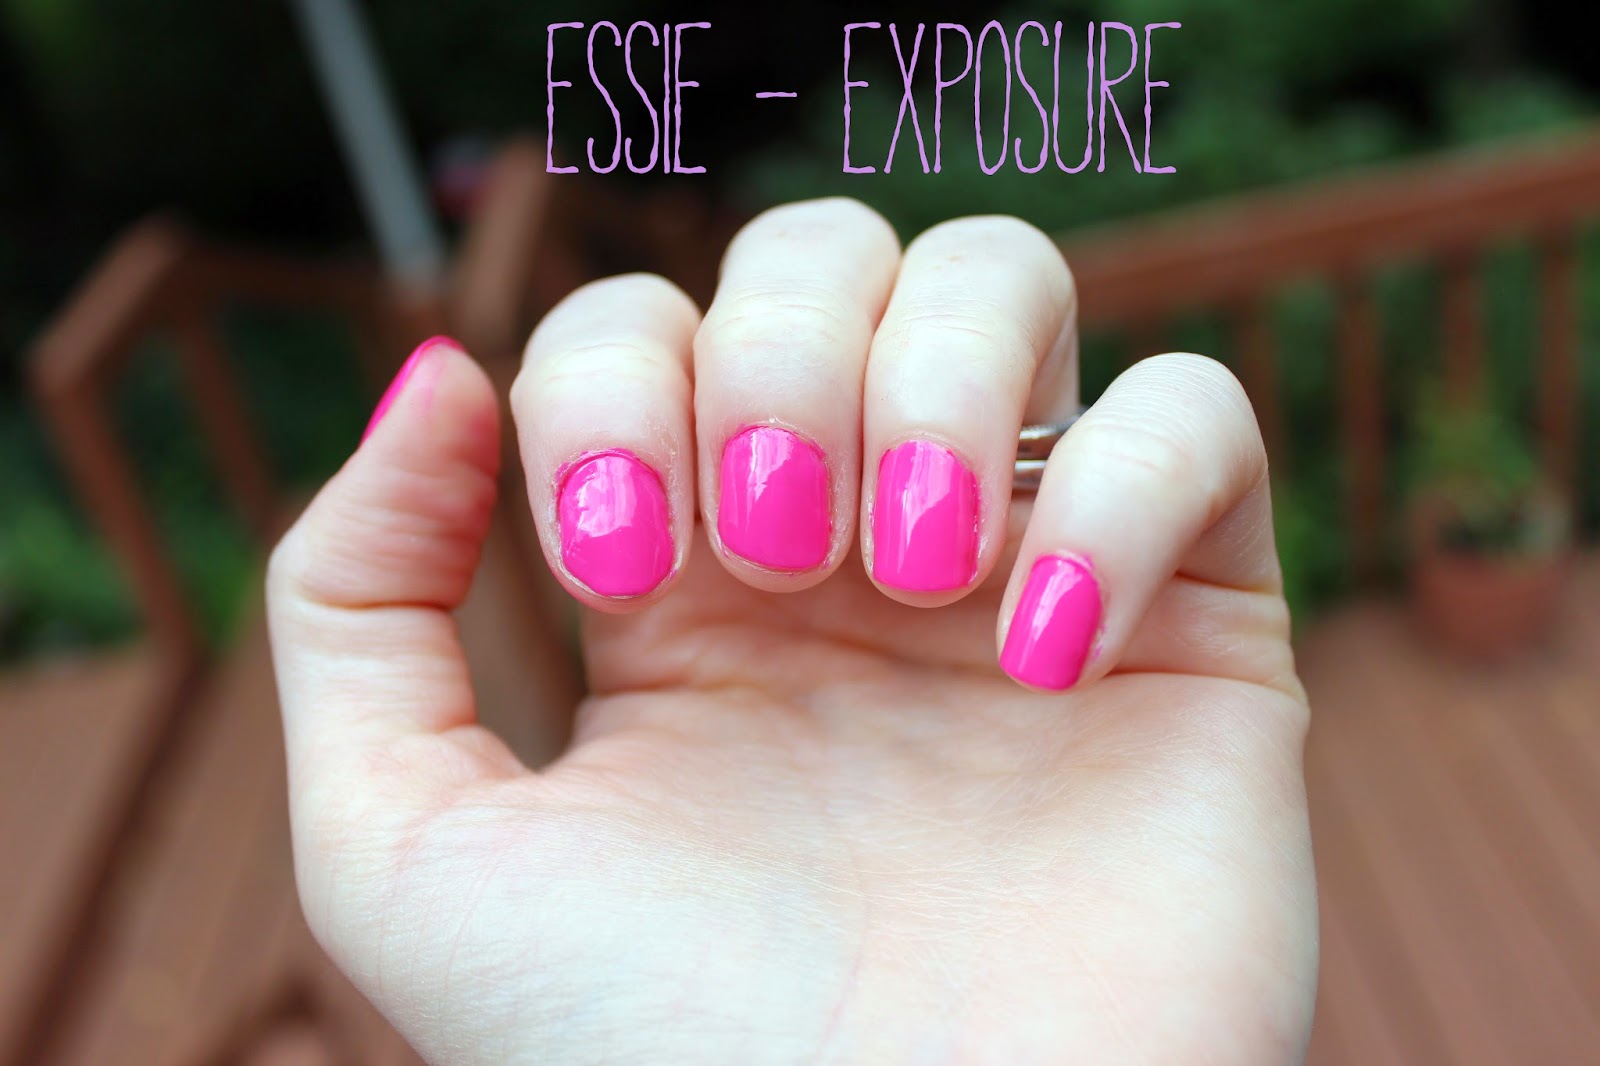 Glazed Over Beauty: Essie - Exposure | Swatches & Review